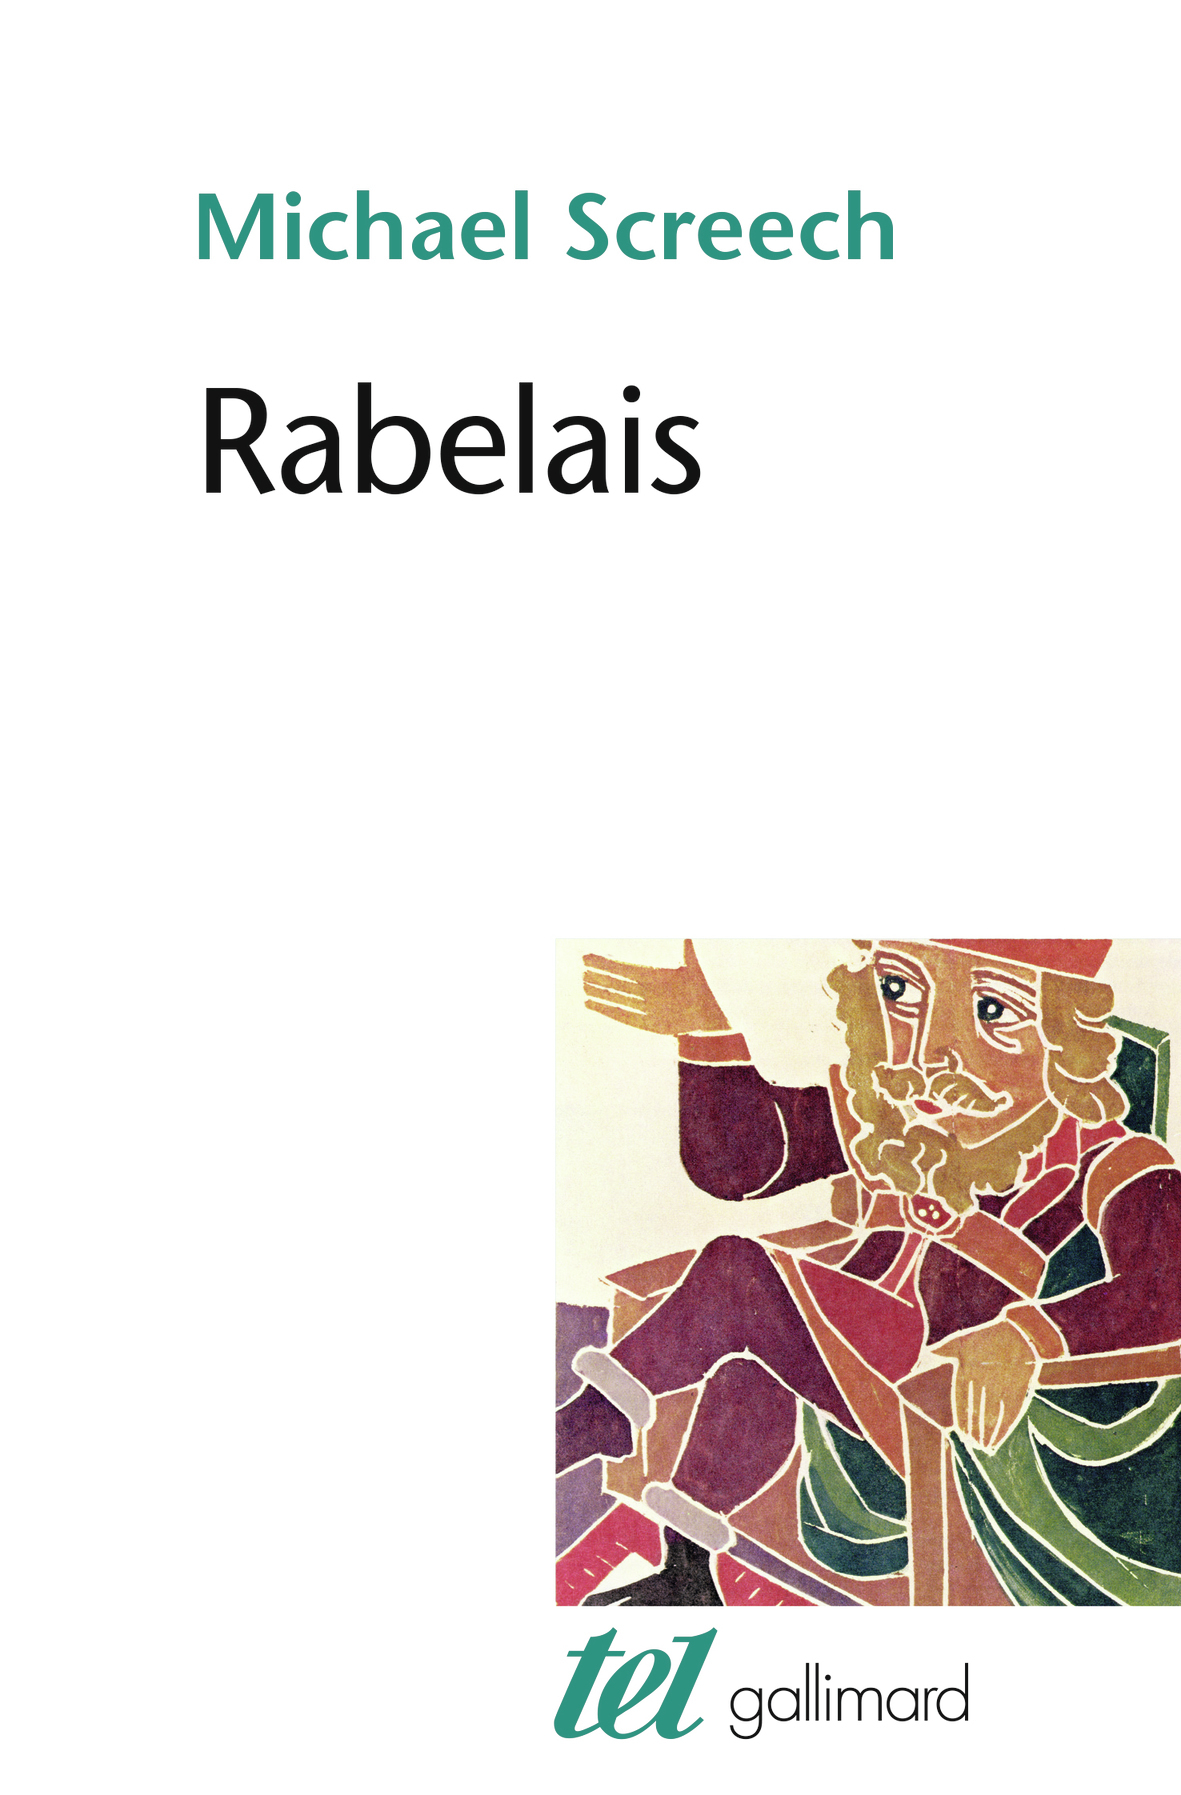 Rabelais (9782070123483-front-cover)